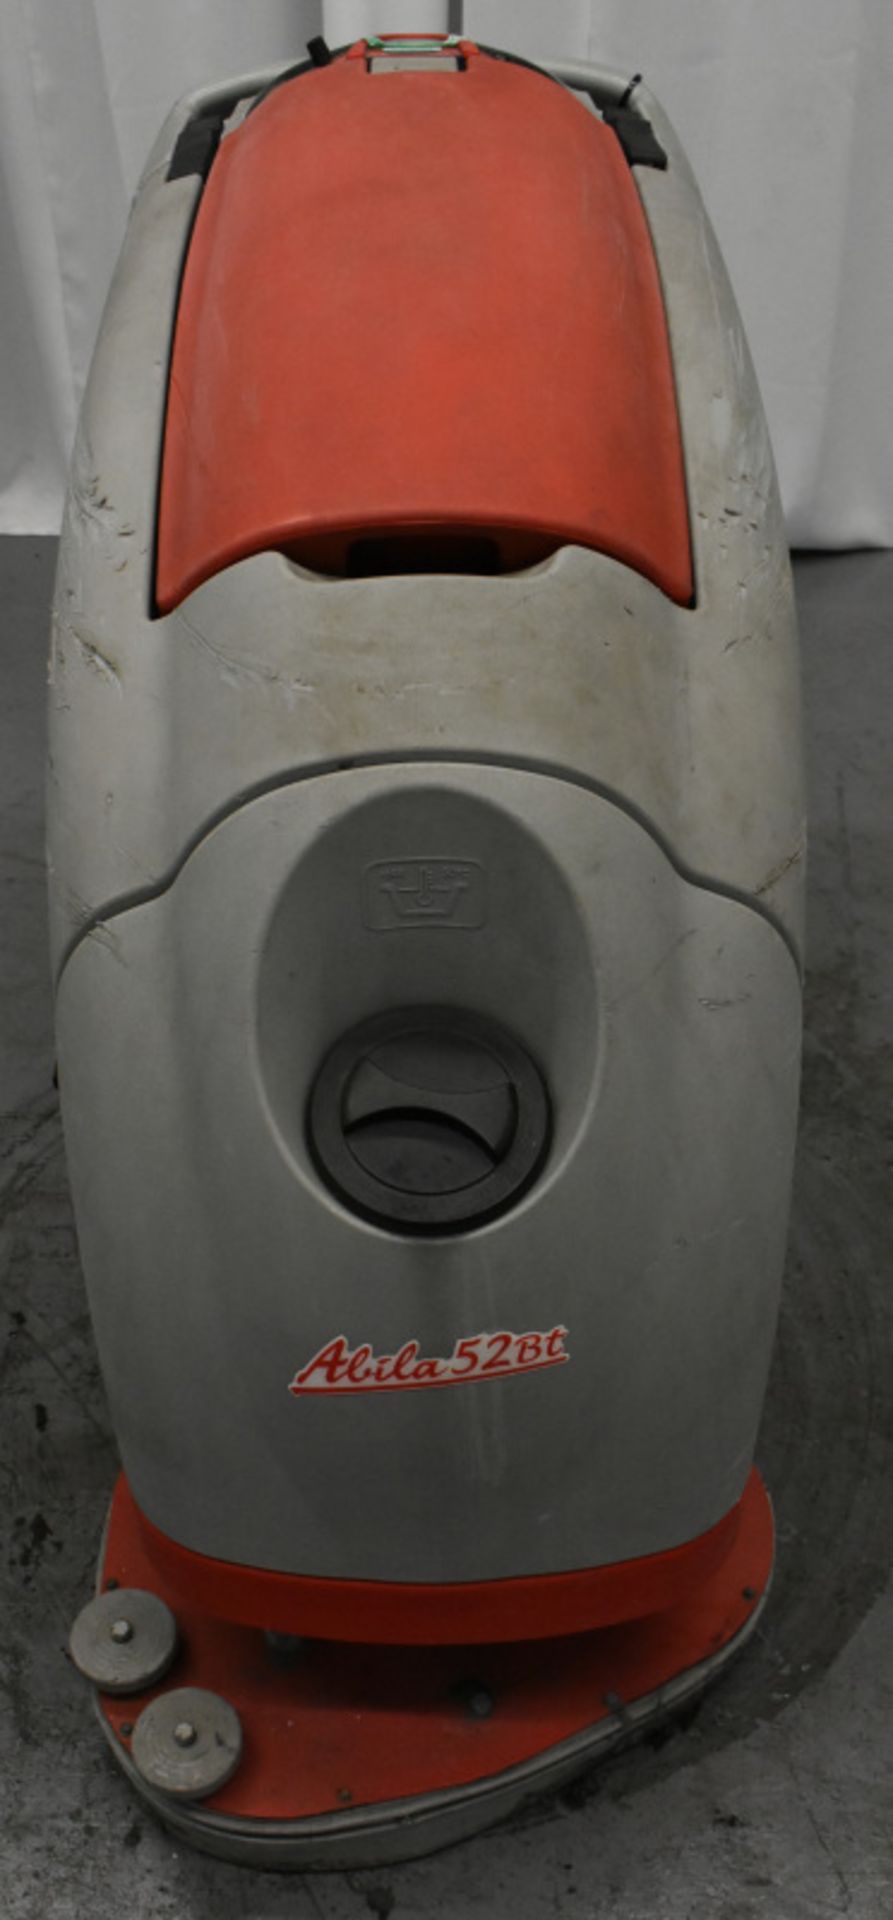 Comac Abila 52Bt Floor Scrubber Dryer, comes with key, starts and runs- 945 hours - Image 7 of 7